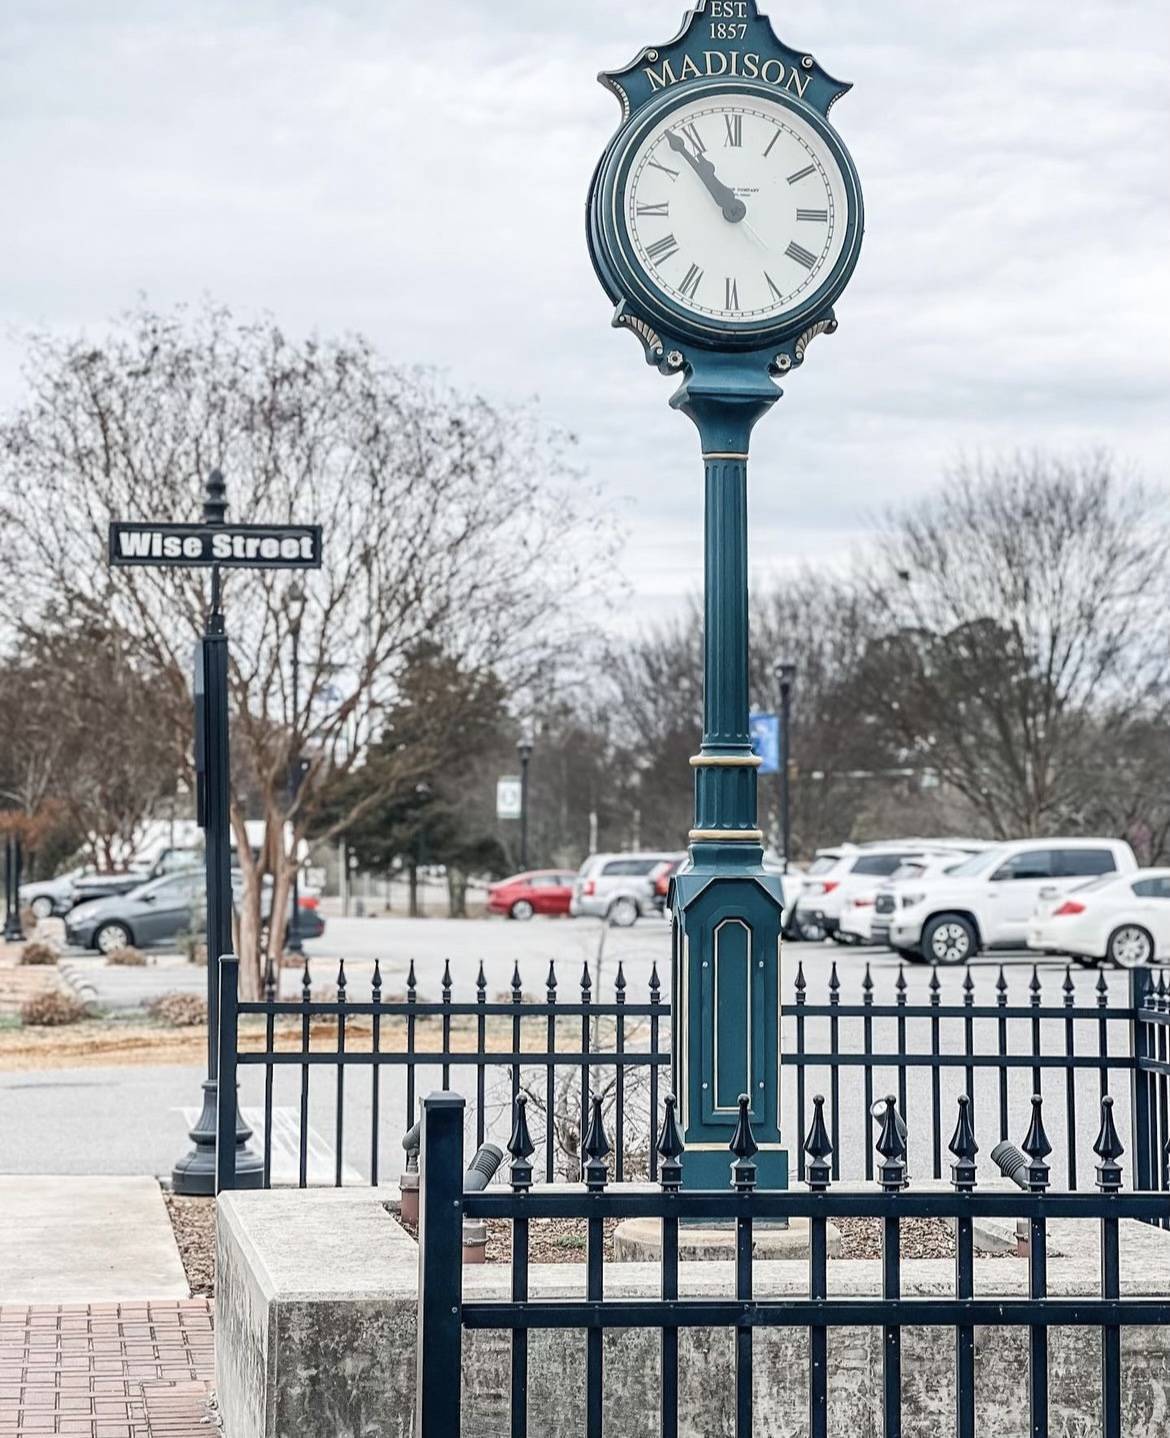 Downtown Madison, Alabama: What are The Shoppes of Historic Downtown Madison? This organization was formed in 2022 to help bring more foot traffic and events throughout the years to Downtown Madison.